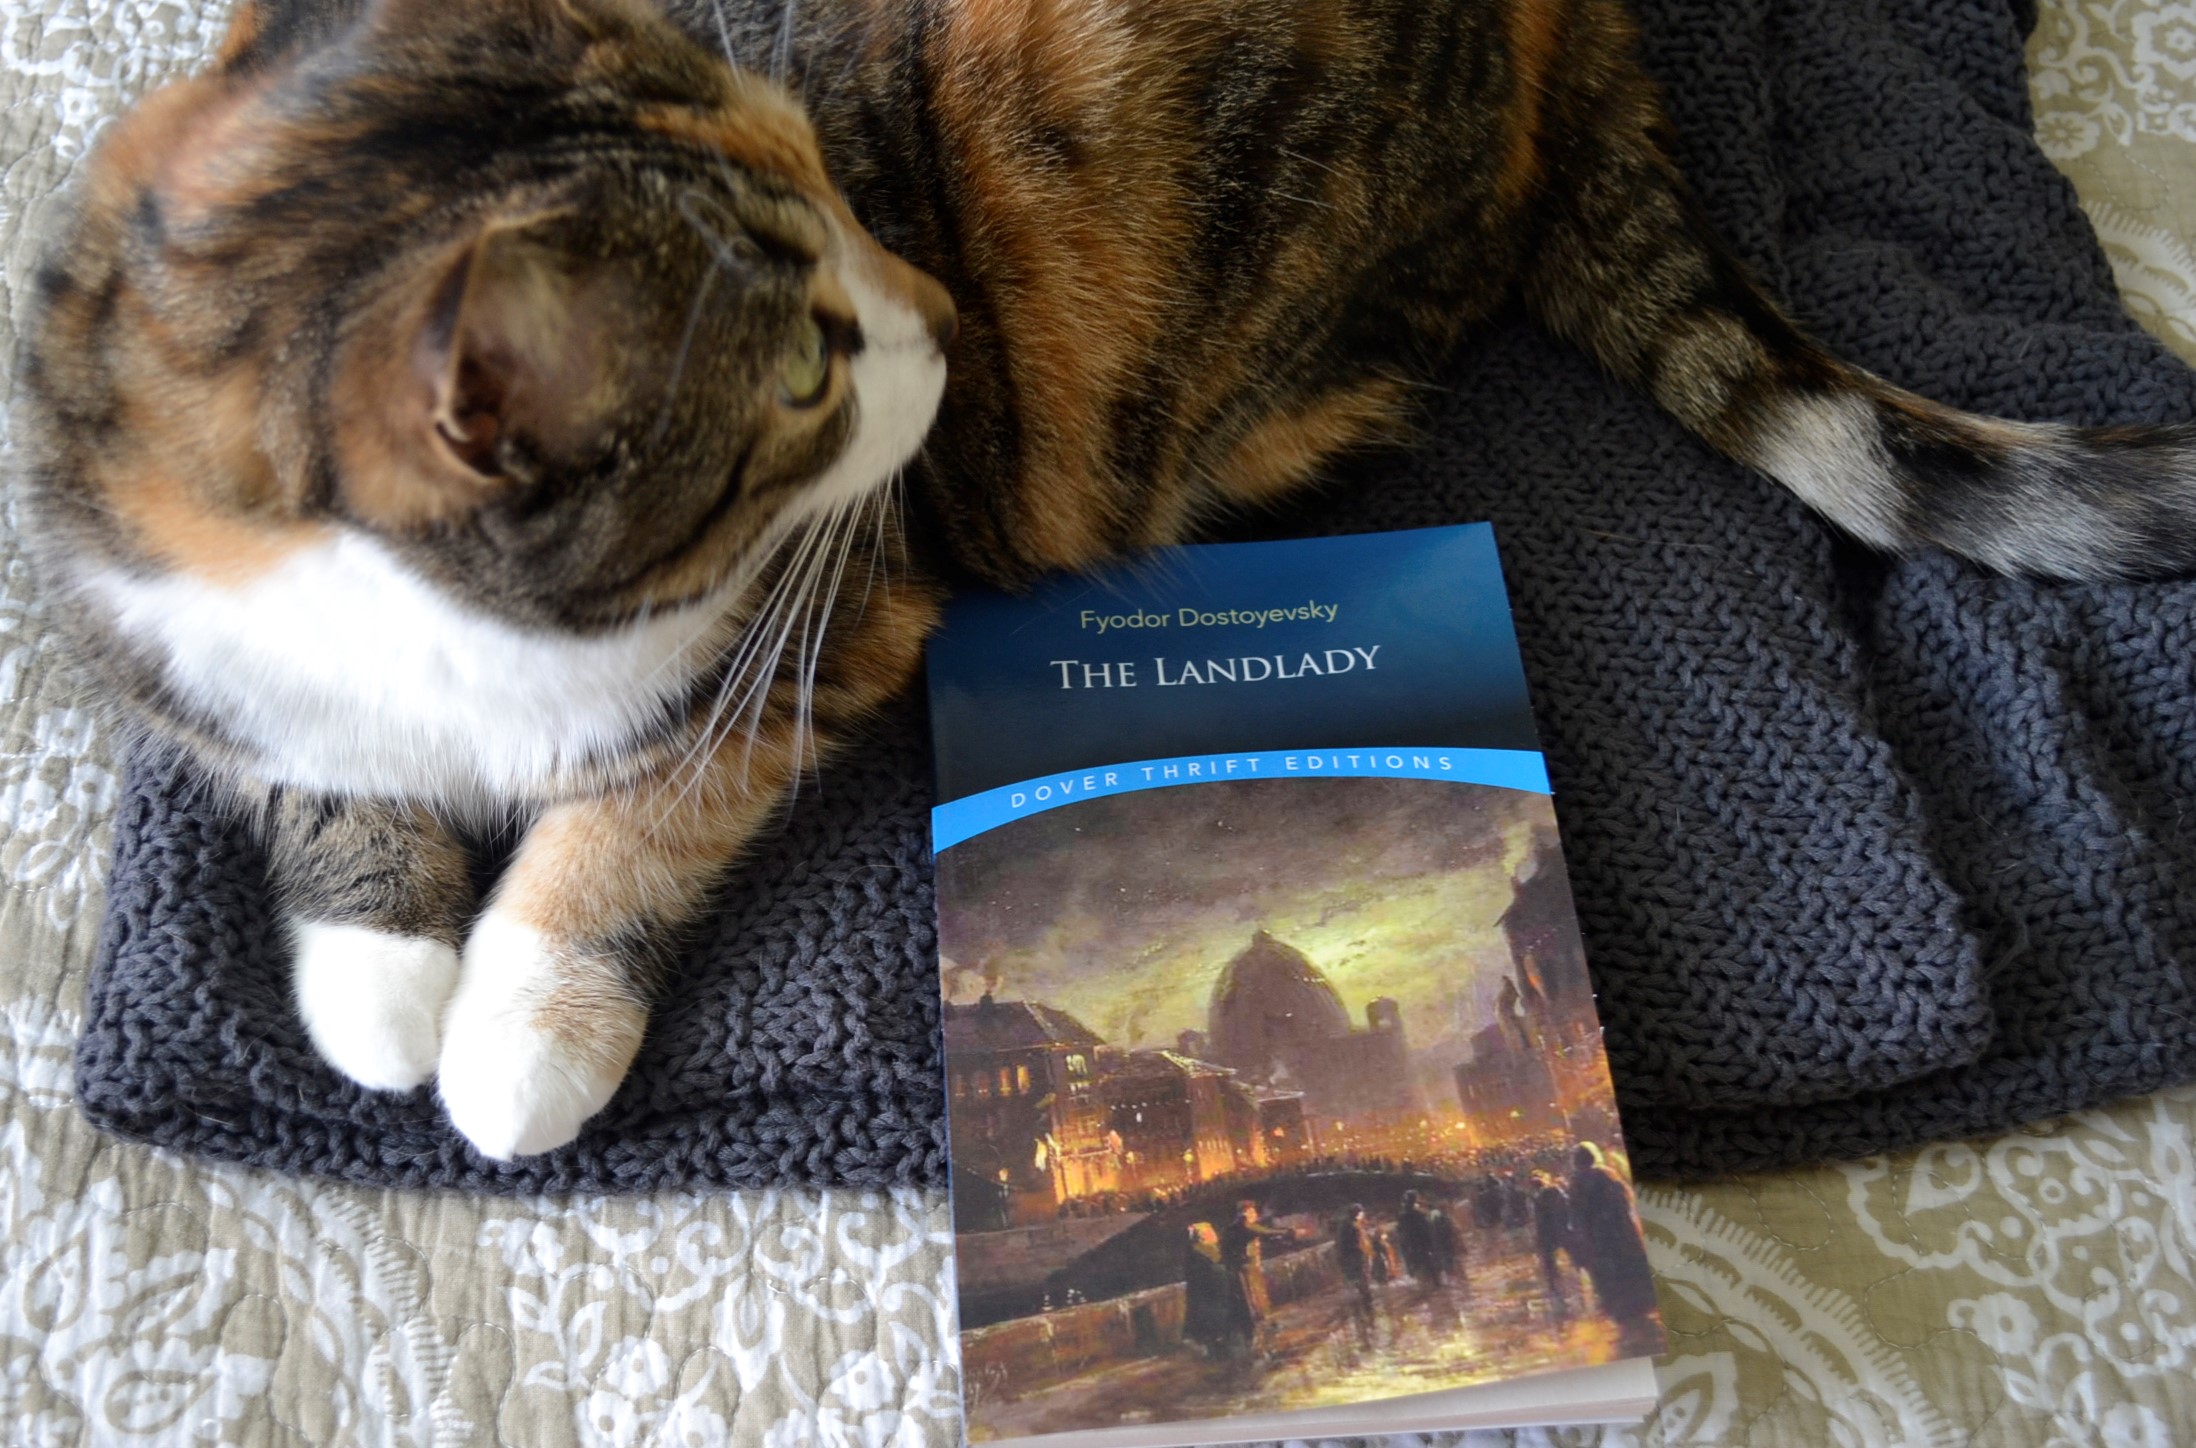 The cover of the Landlady beside a calico tabby cat.